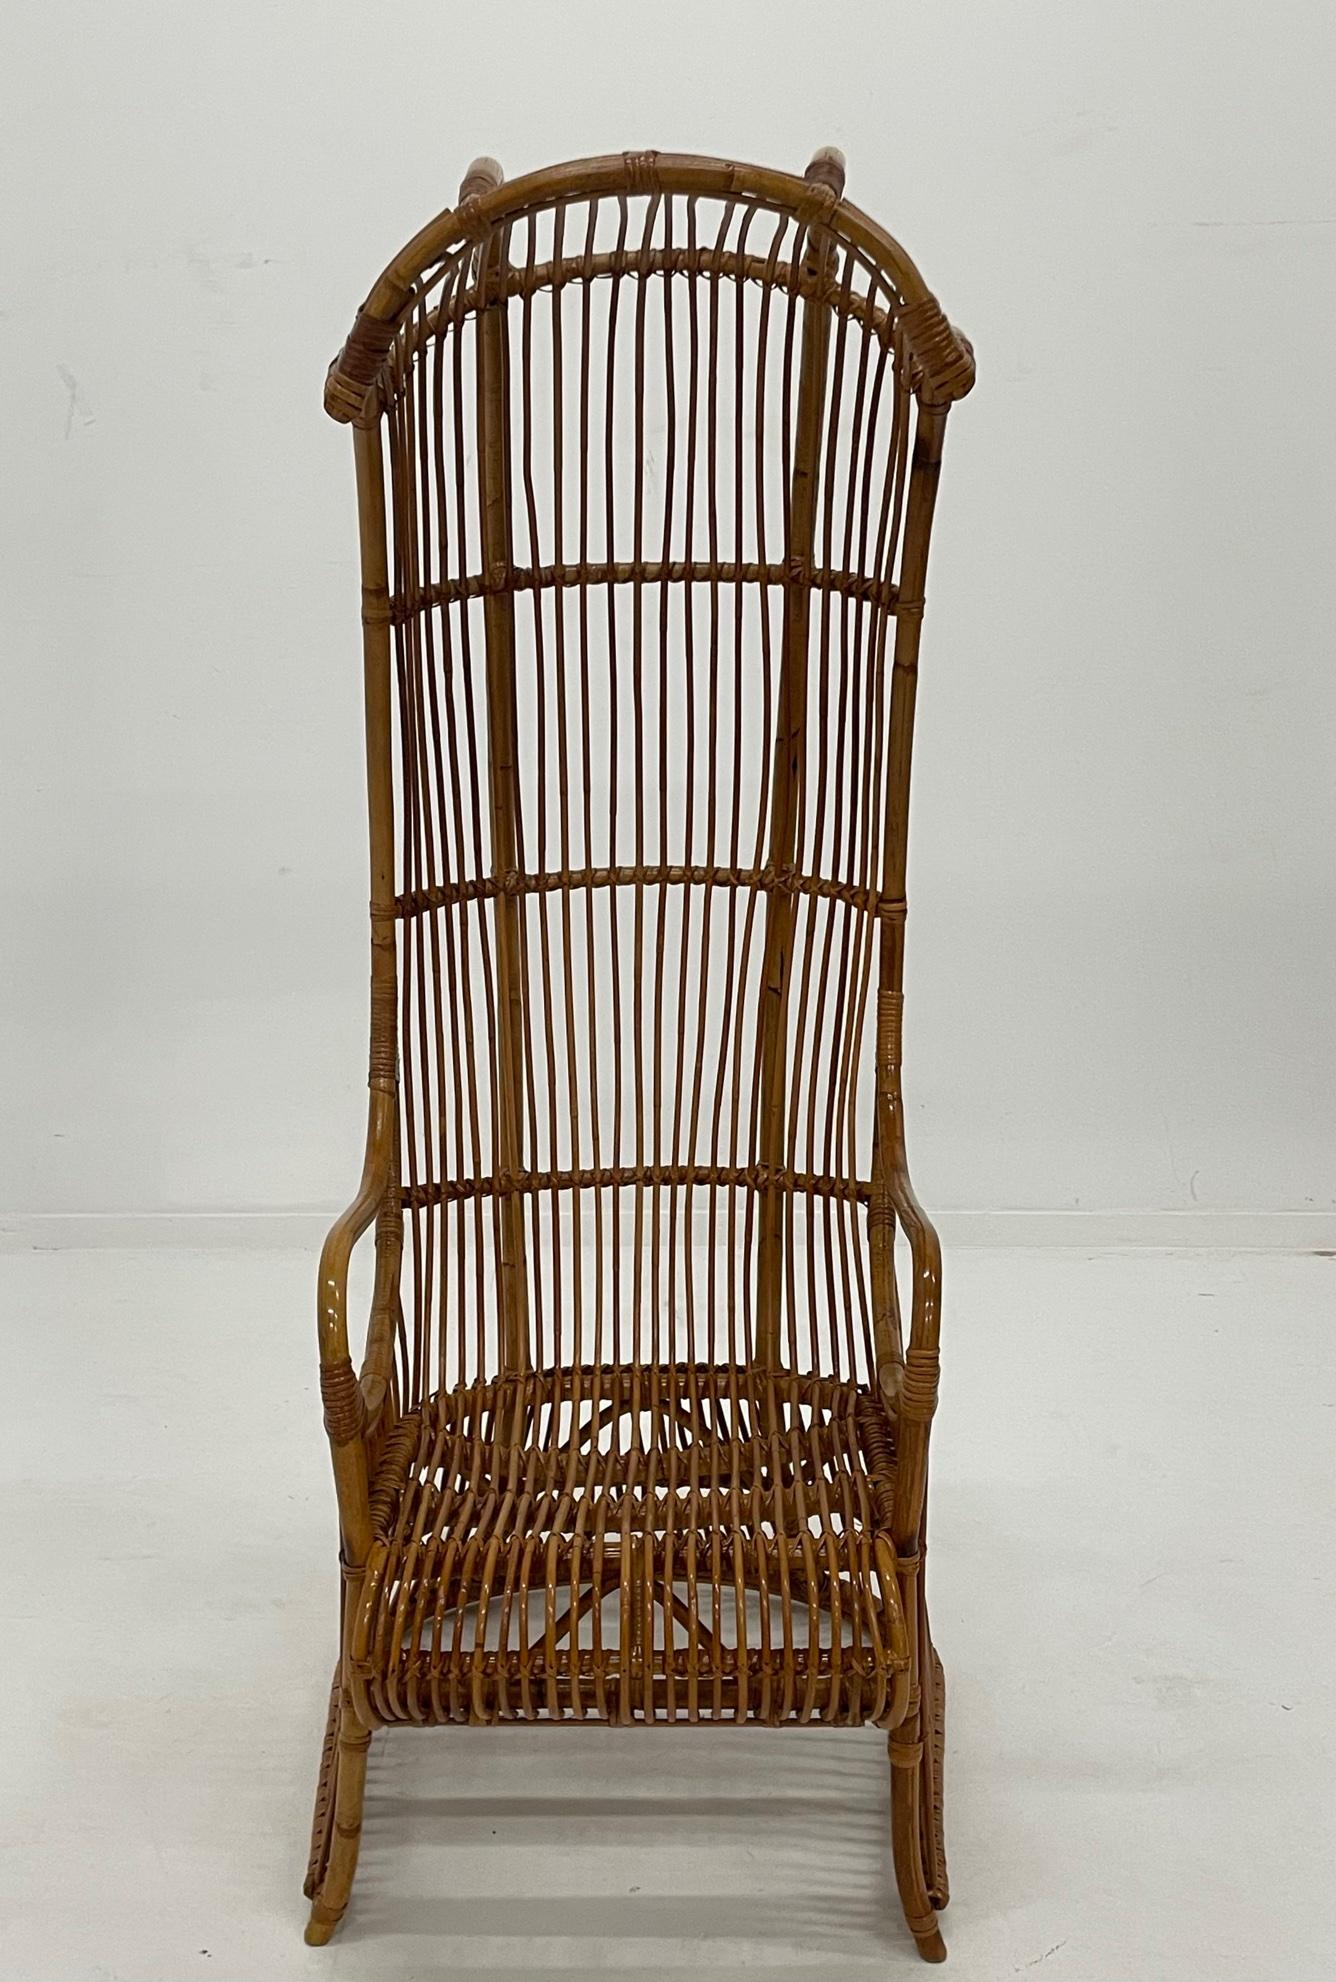 The show stopper chair in the room is this sculptural elongated rattan Porters chair with fabulous curved top. It's stunning from every angle. Comfortable too. A true work of art in design.
Measures: seat depth 21
arm height 26.